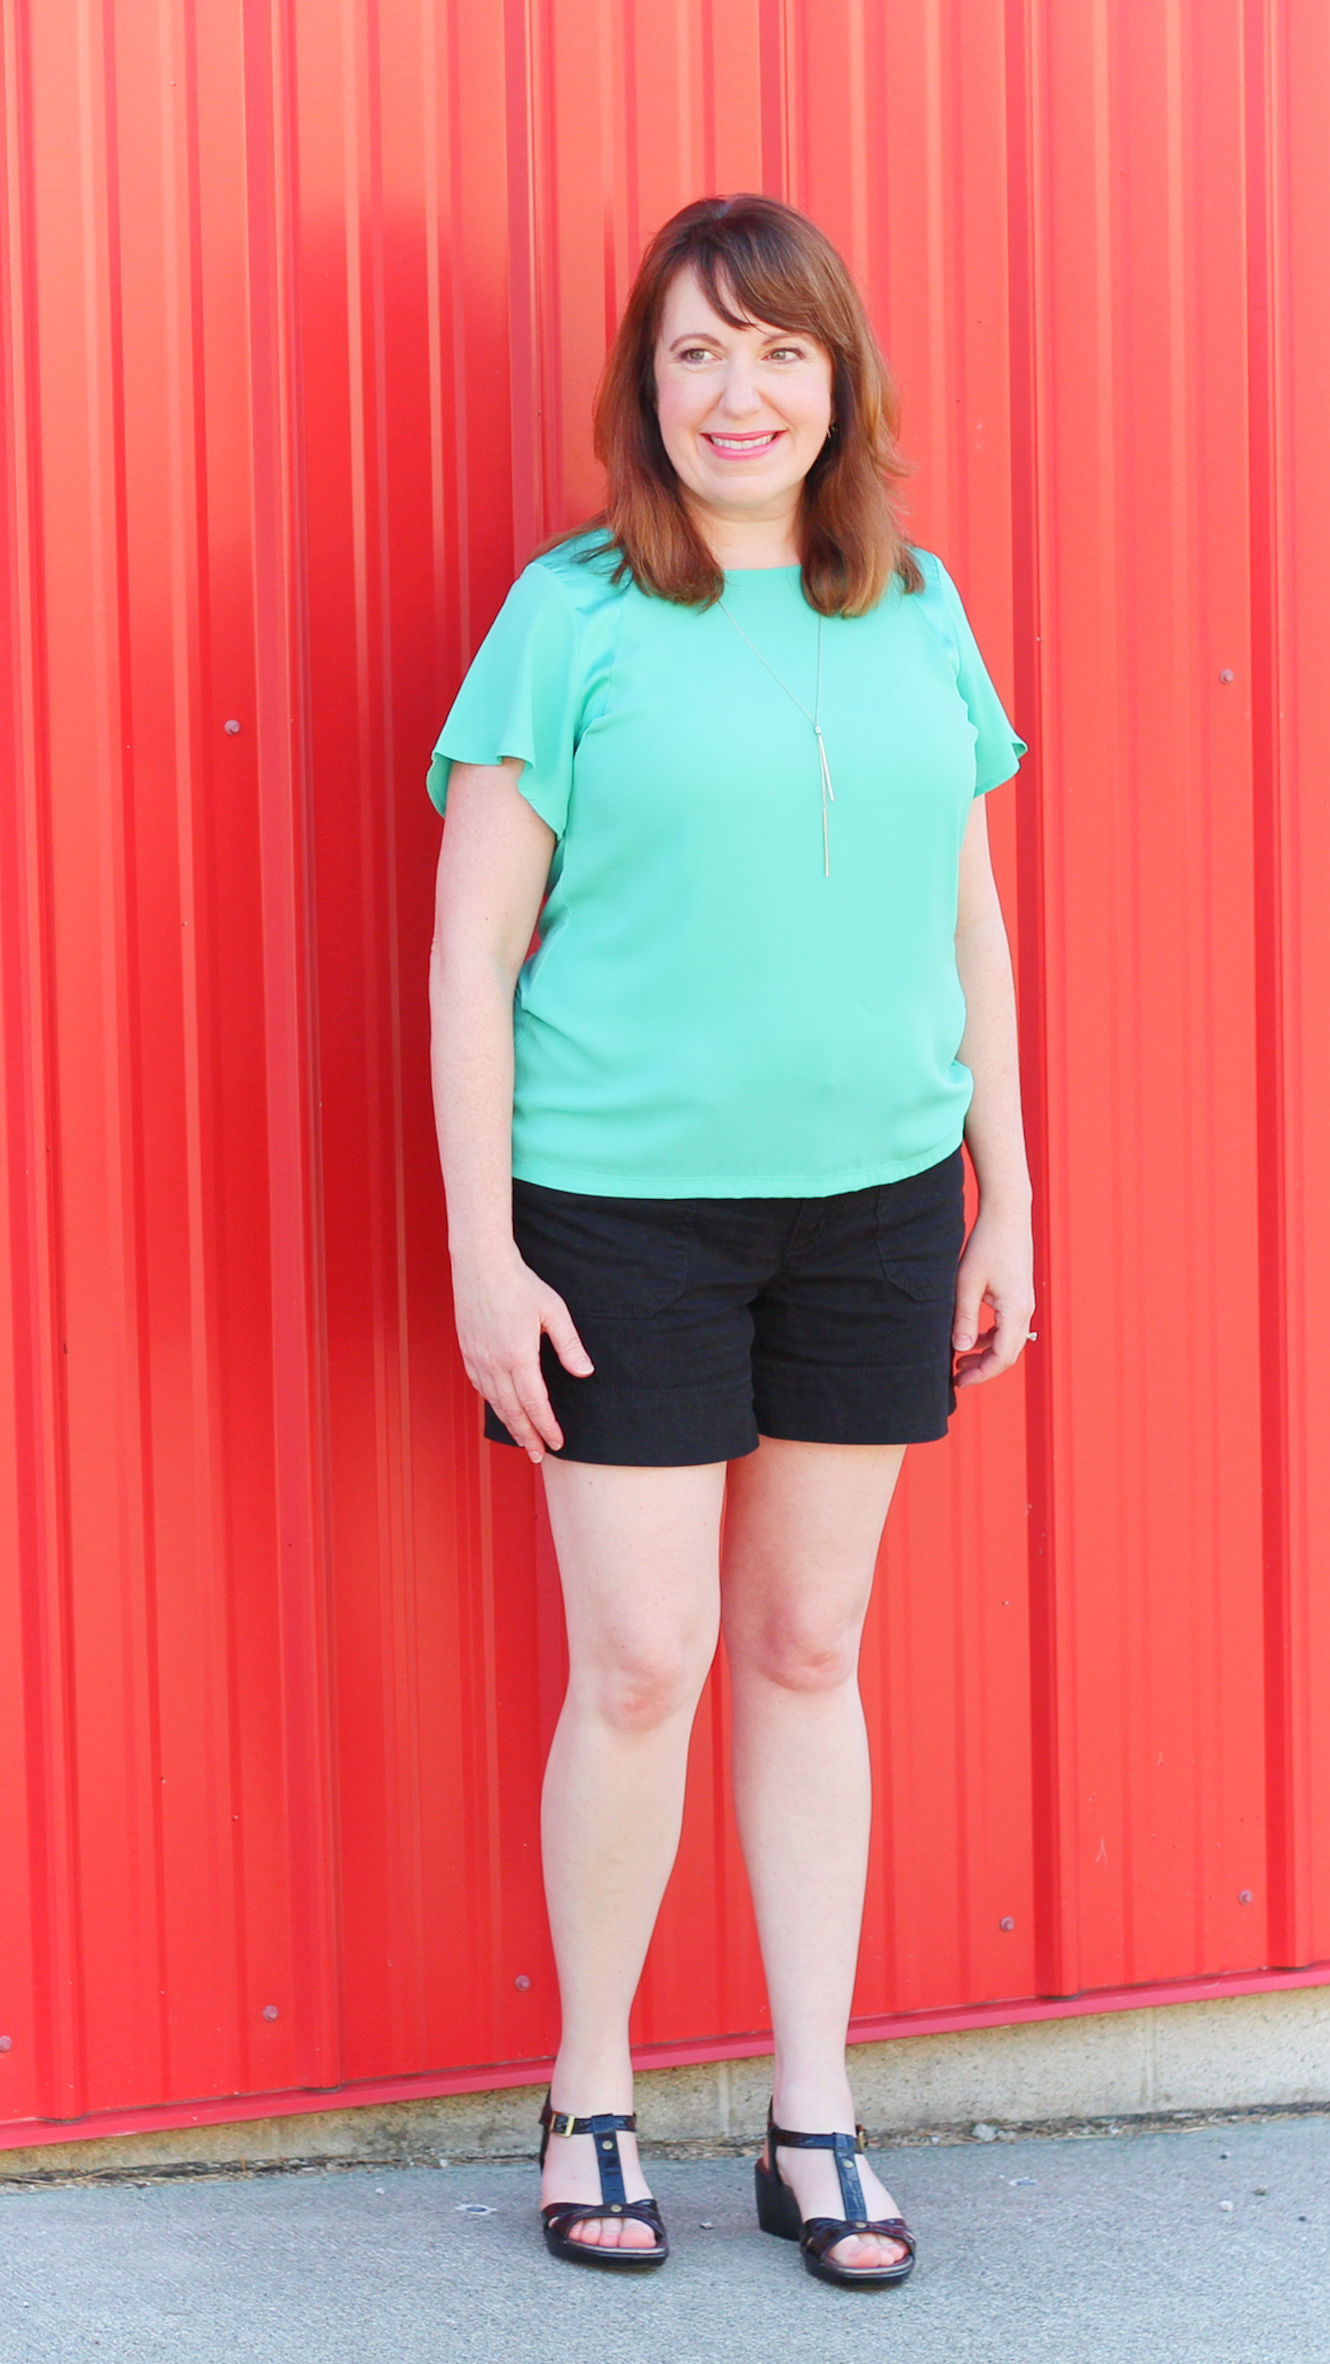 Green Top And Black Shorts #summeroutfit #over40fashion